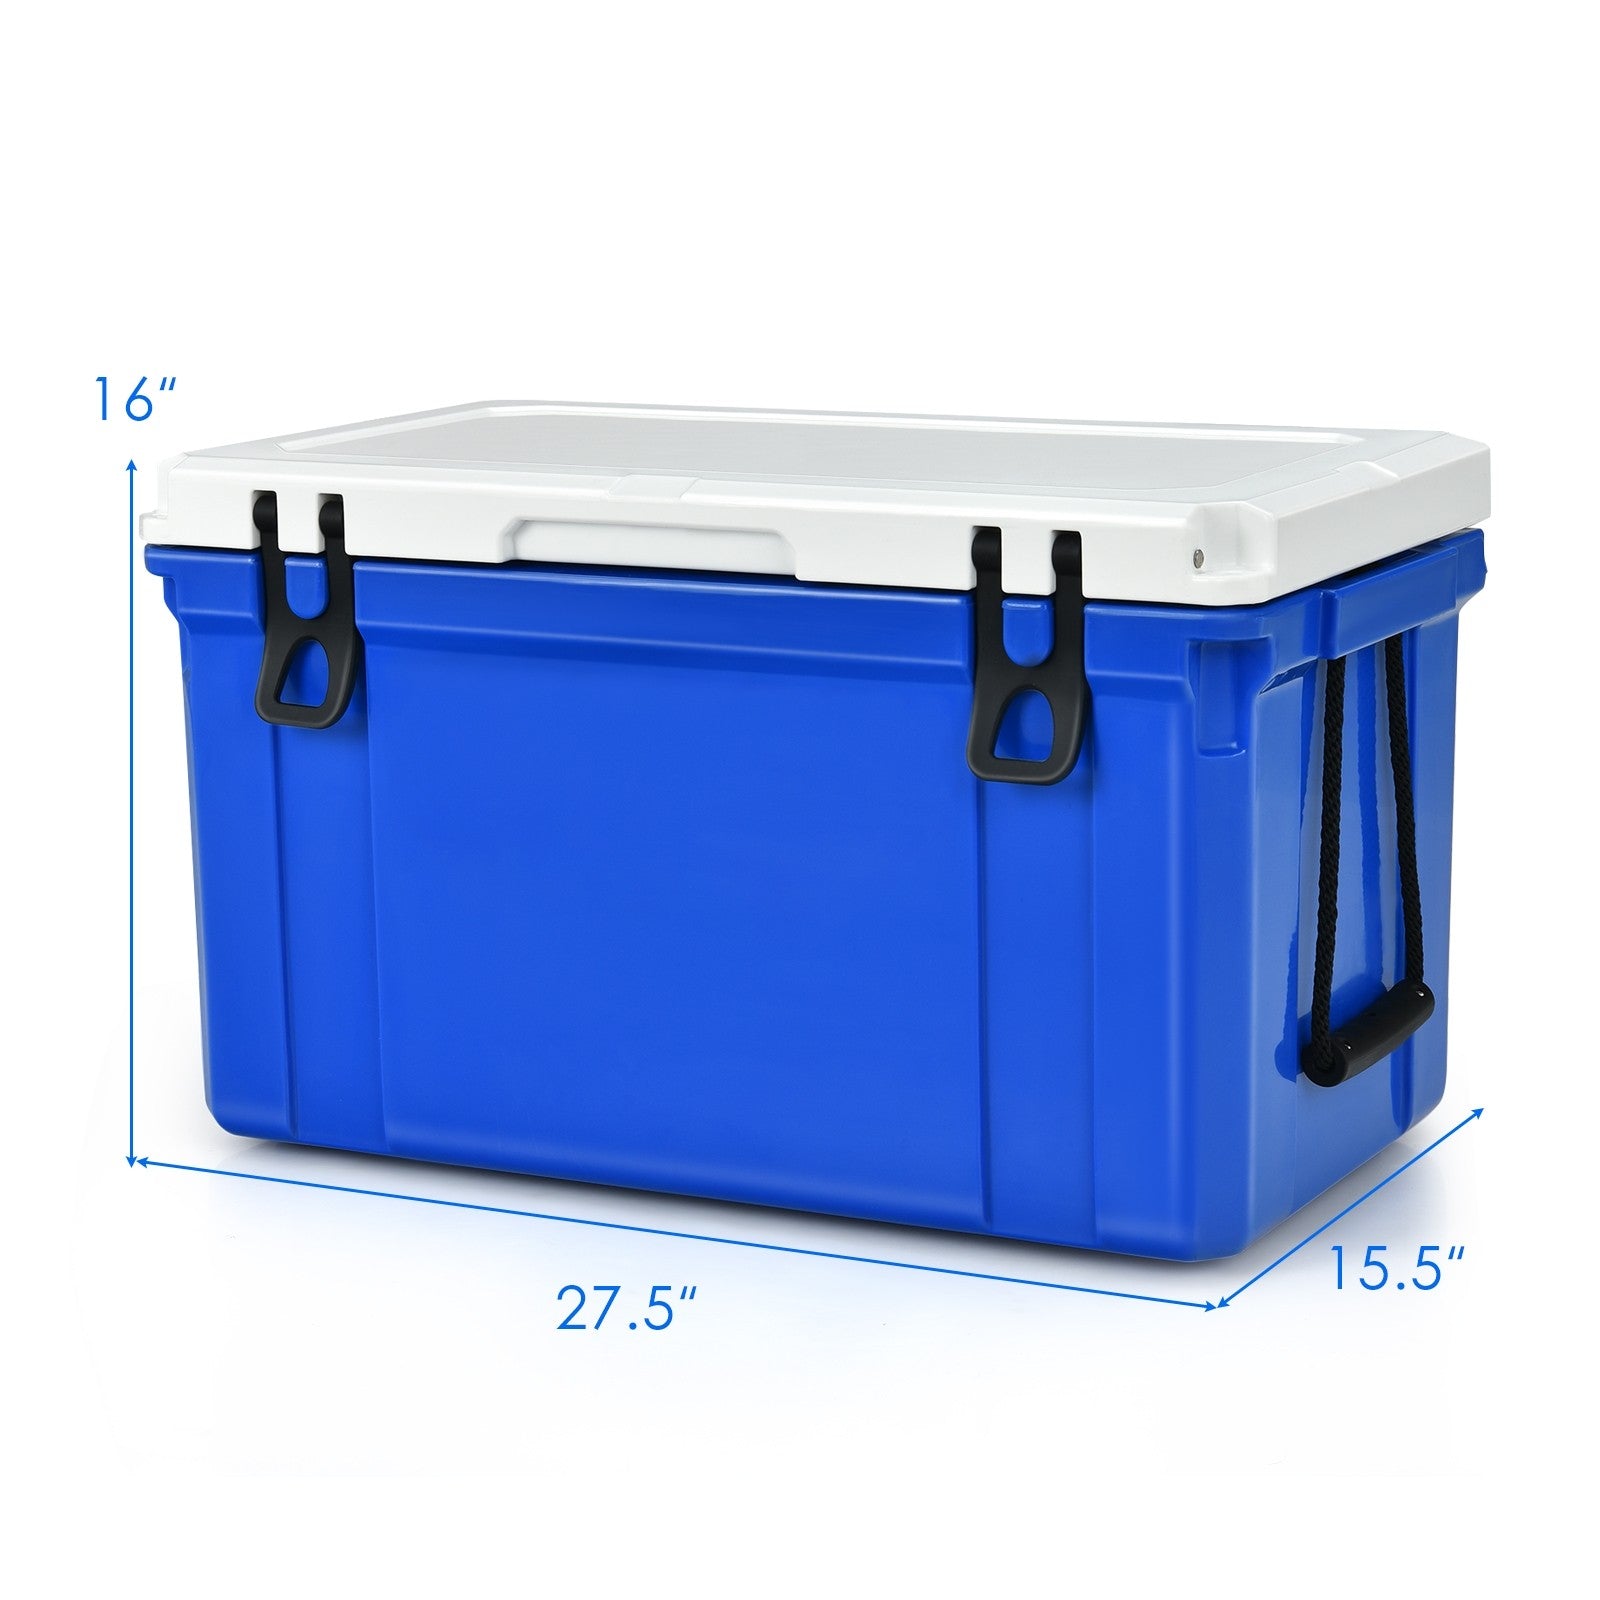 Giantex Portable Cooler, 3-4 Days Camping Ice Chest, 79/58 Quart